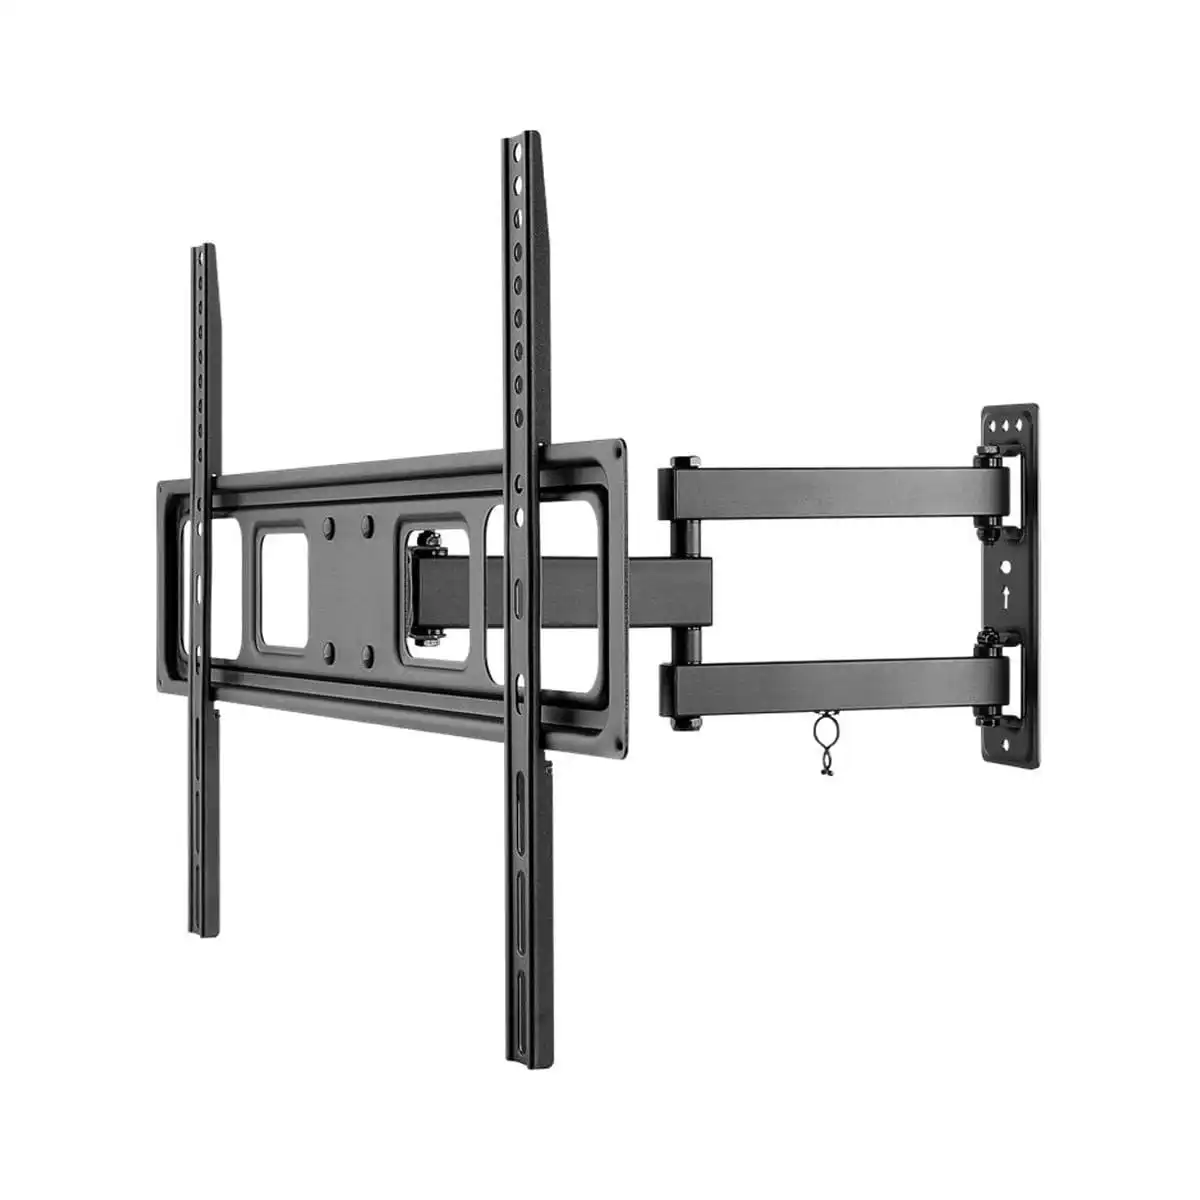 Goobay TV Wall Mount Basic FULLMOTION Large for TVs 37 to 70 inch